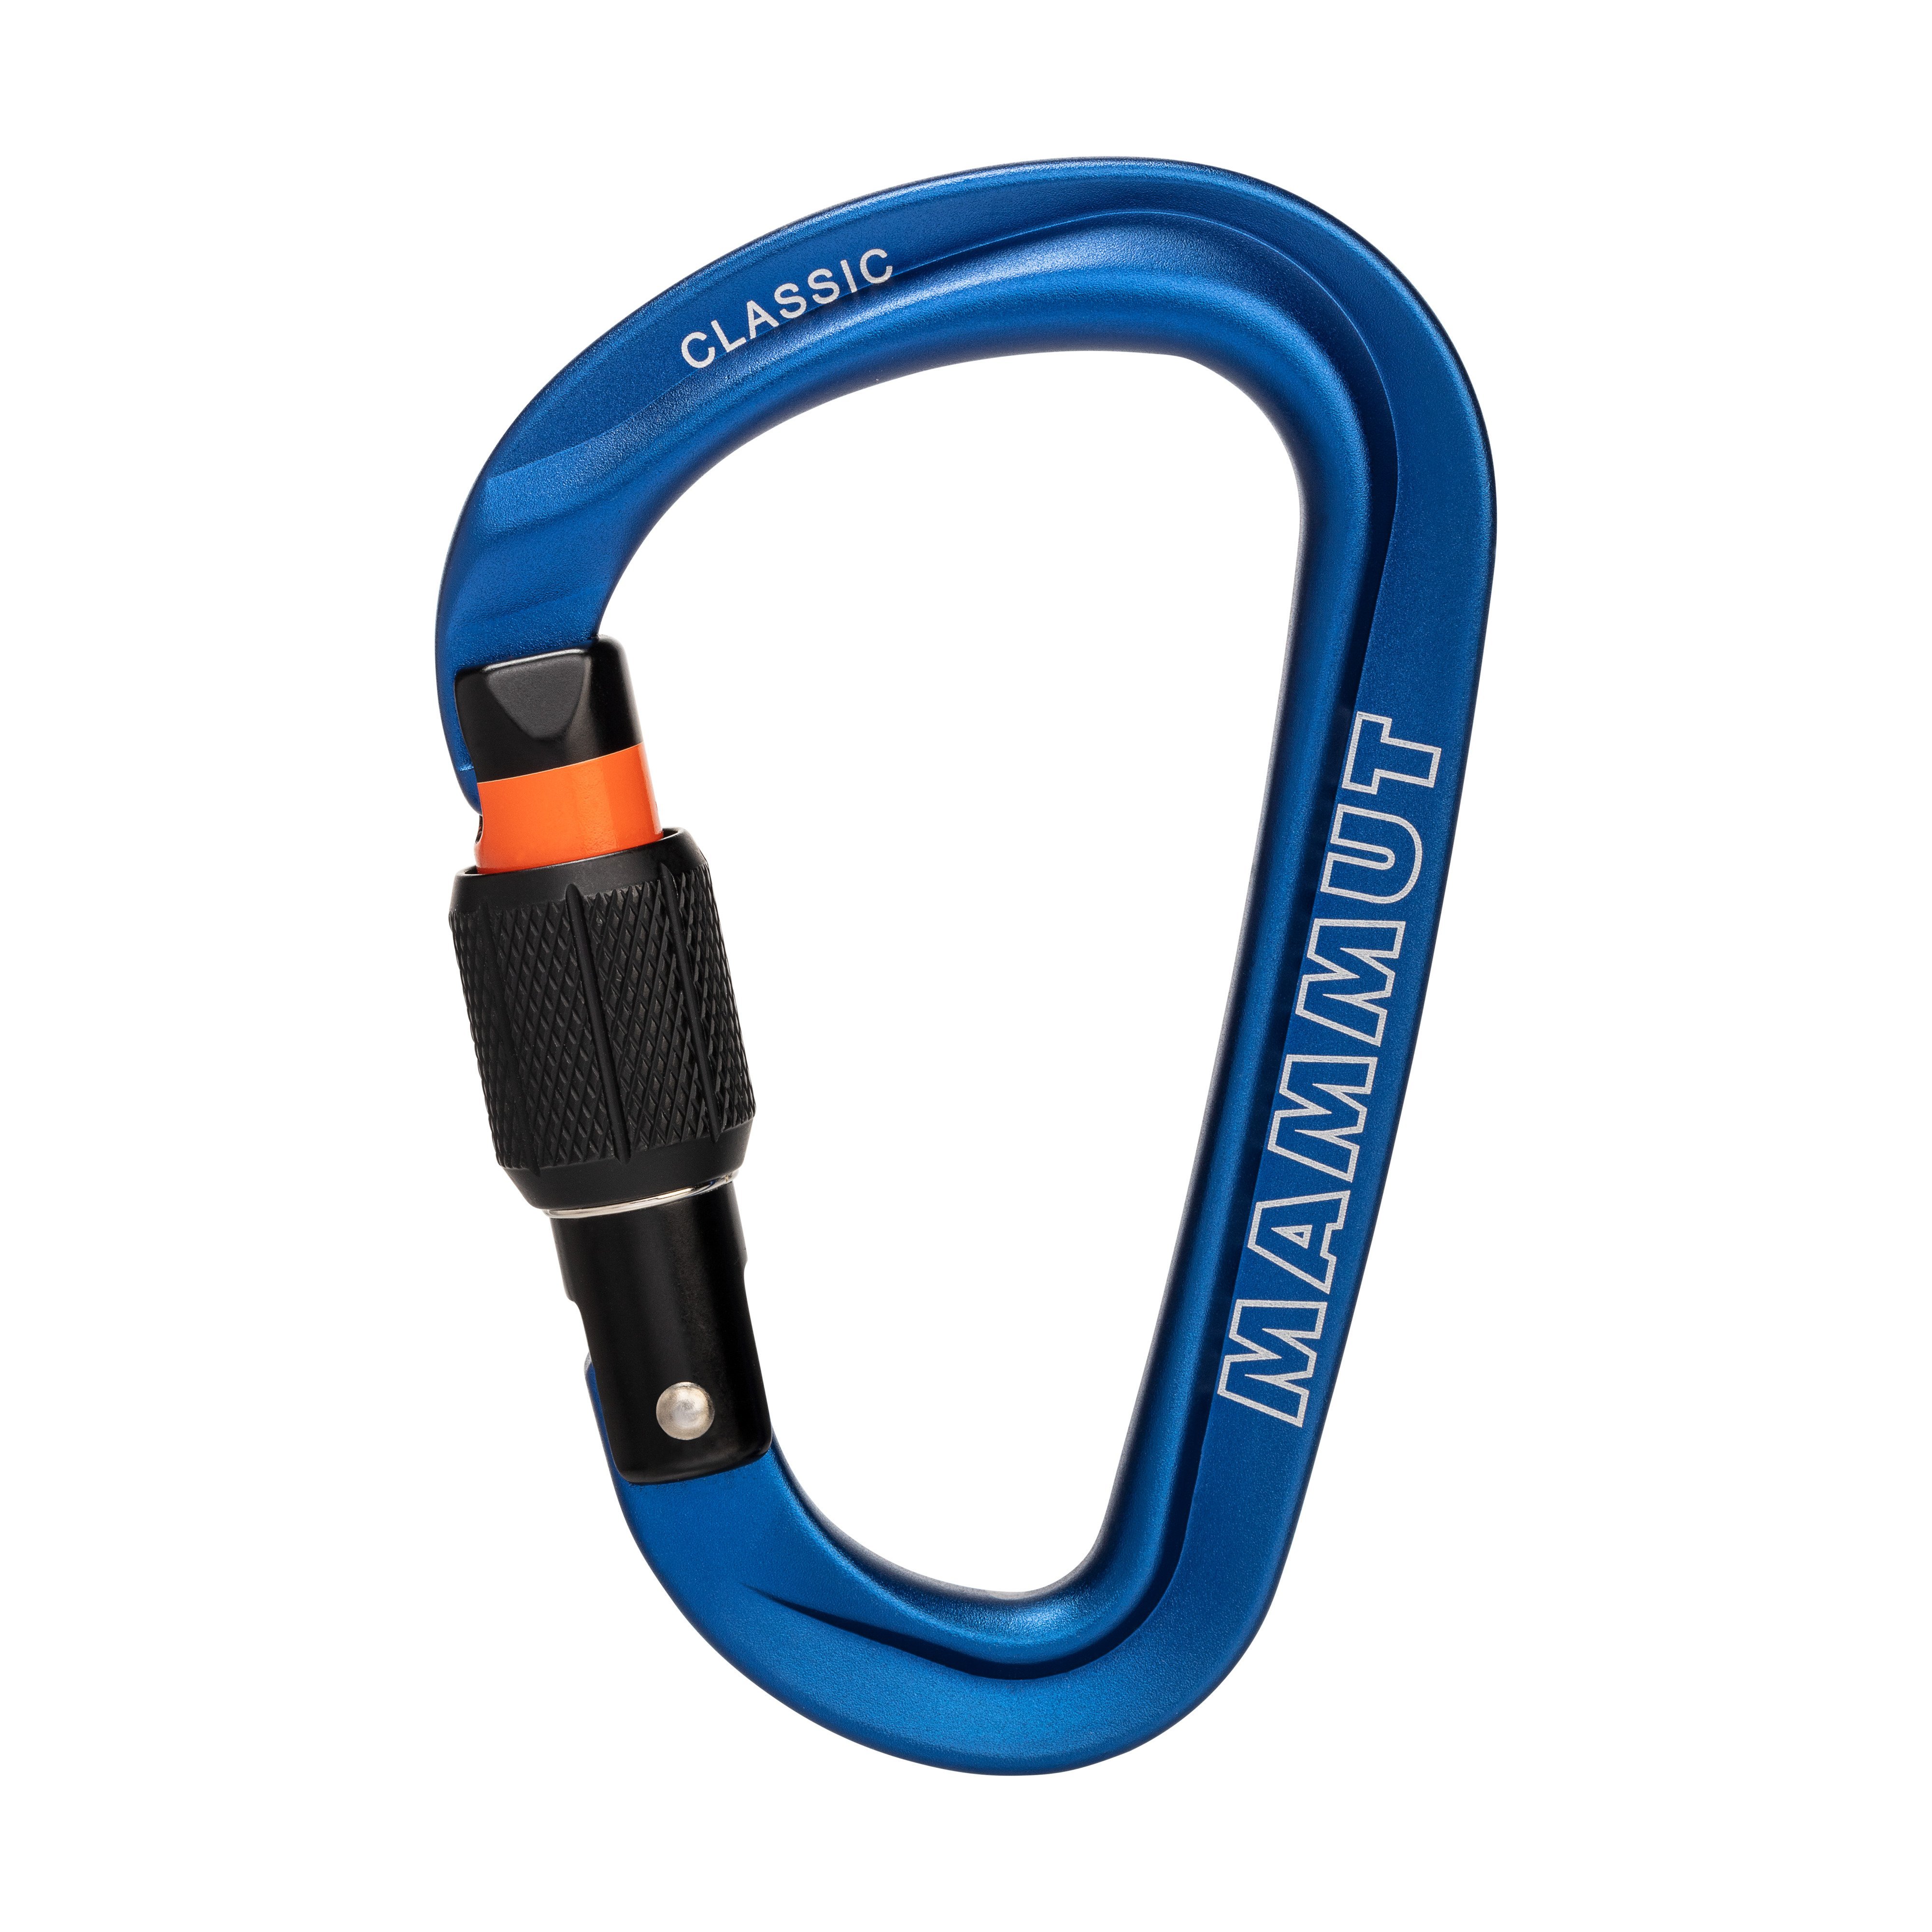 Classic HMS Screwgate Carabiner - one size product image